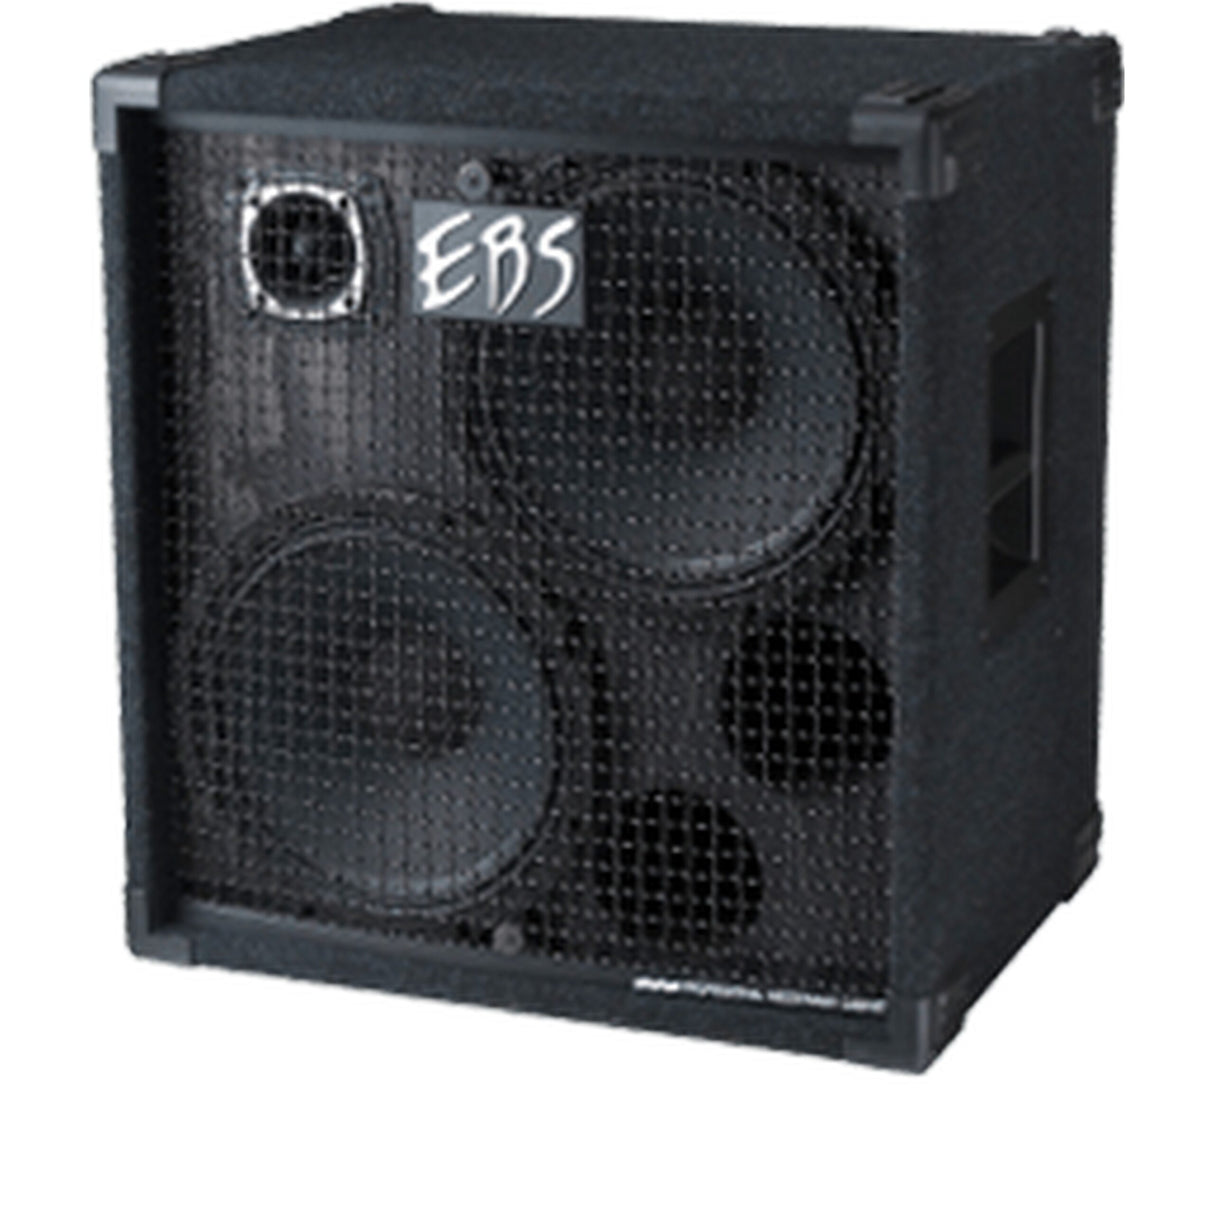 EBS NeoLine 212 Bass Cabinet, 2 x 12 Inch